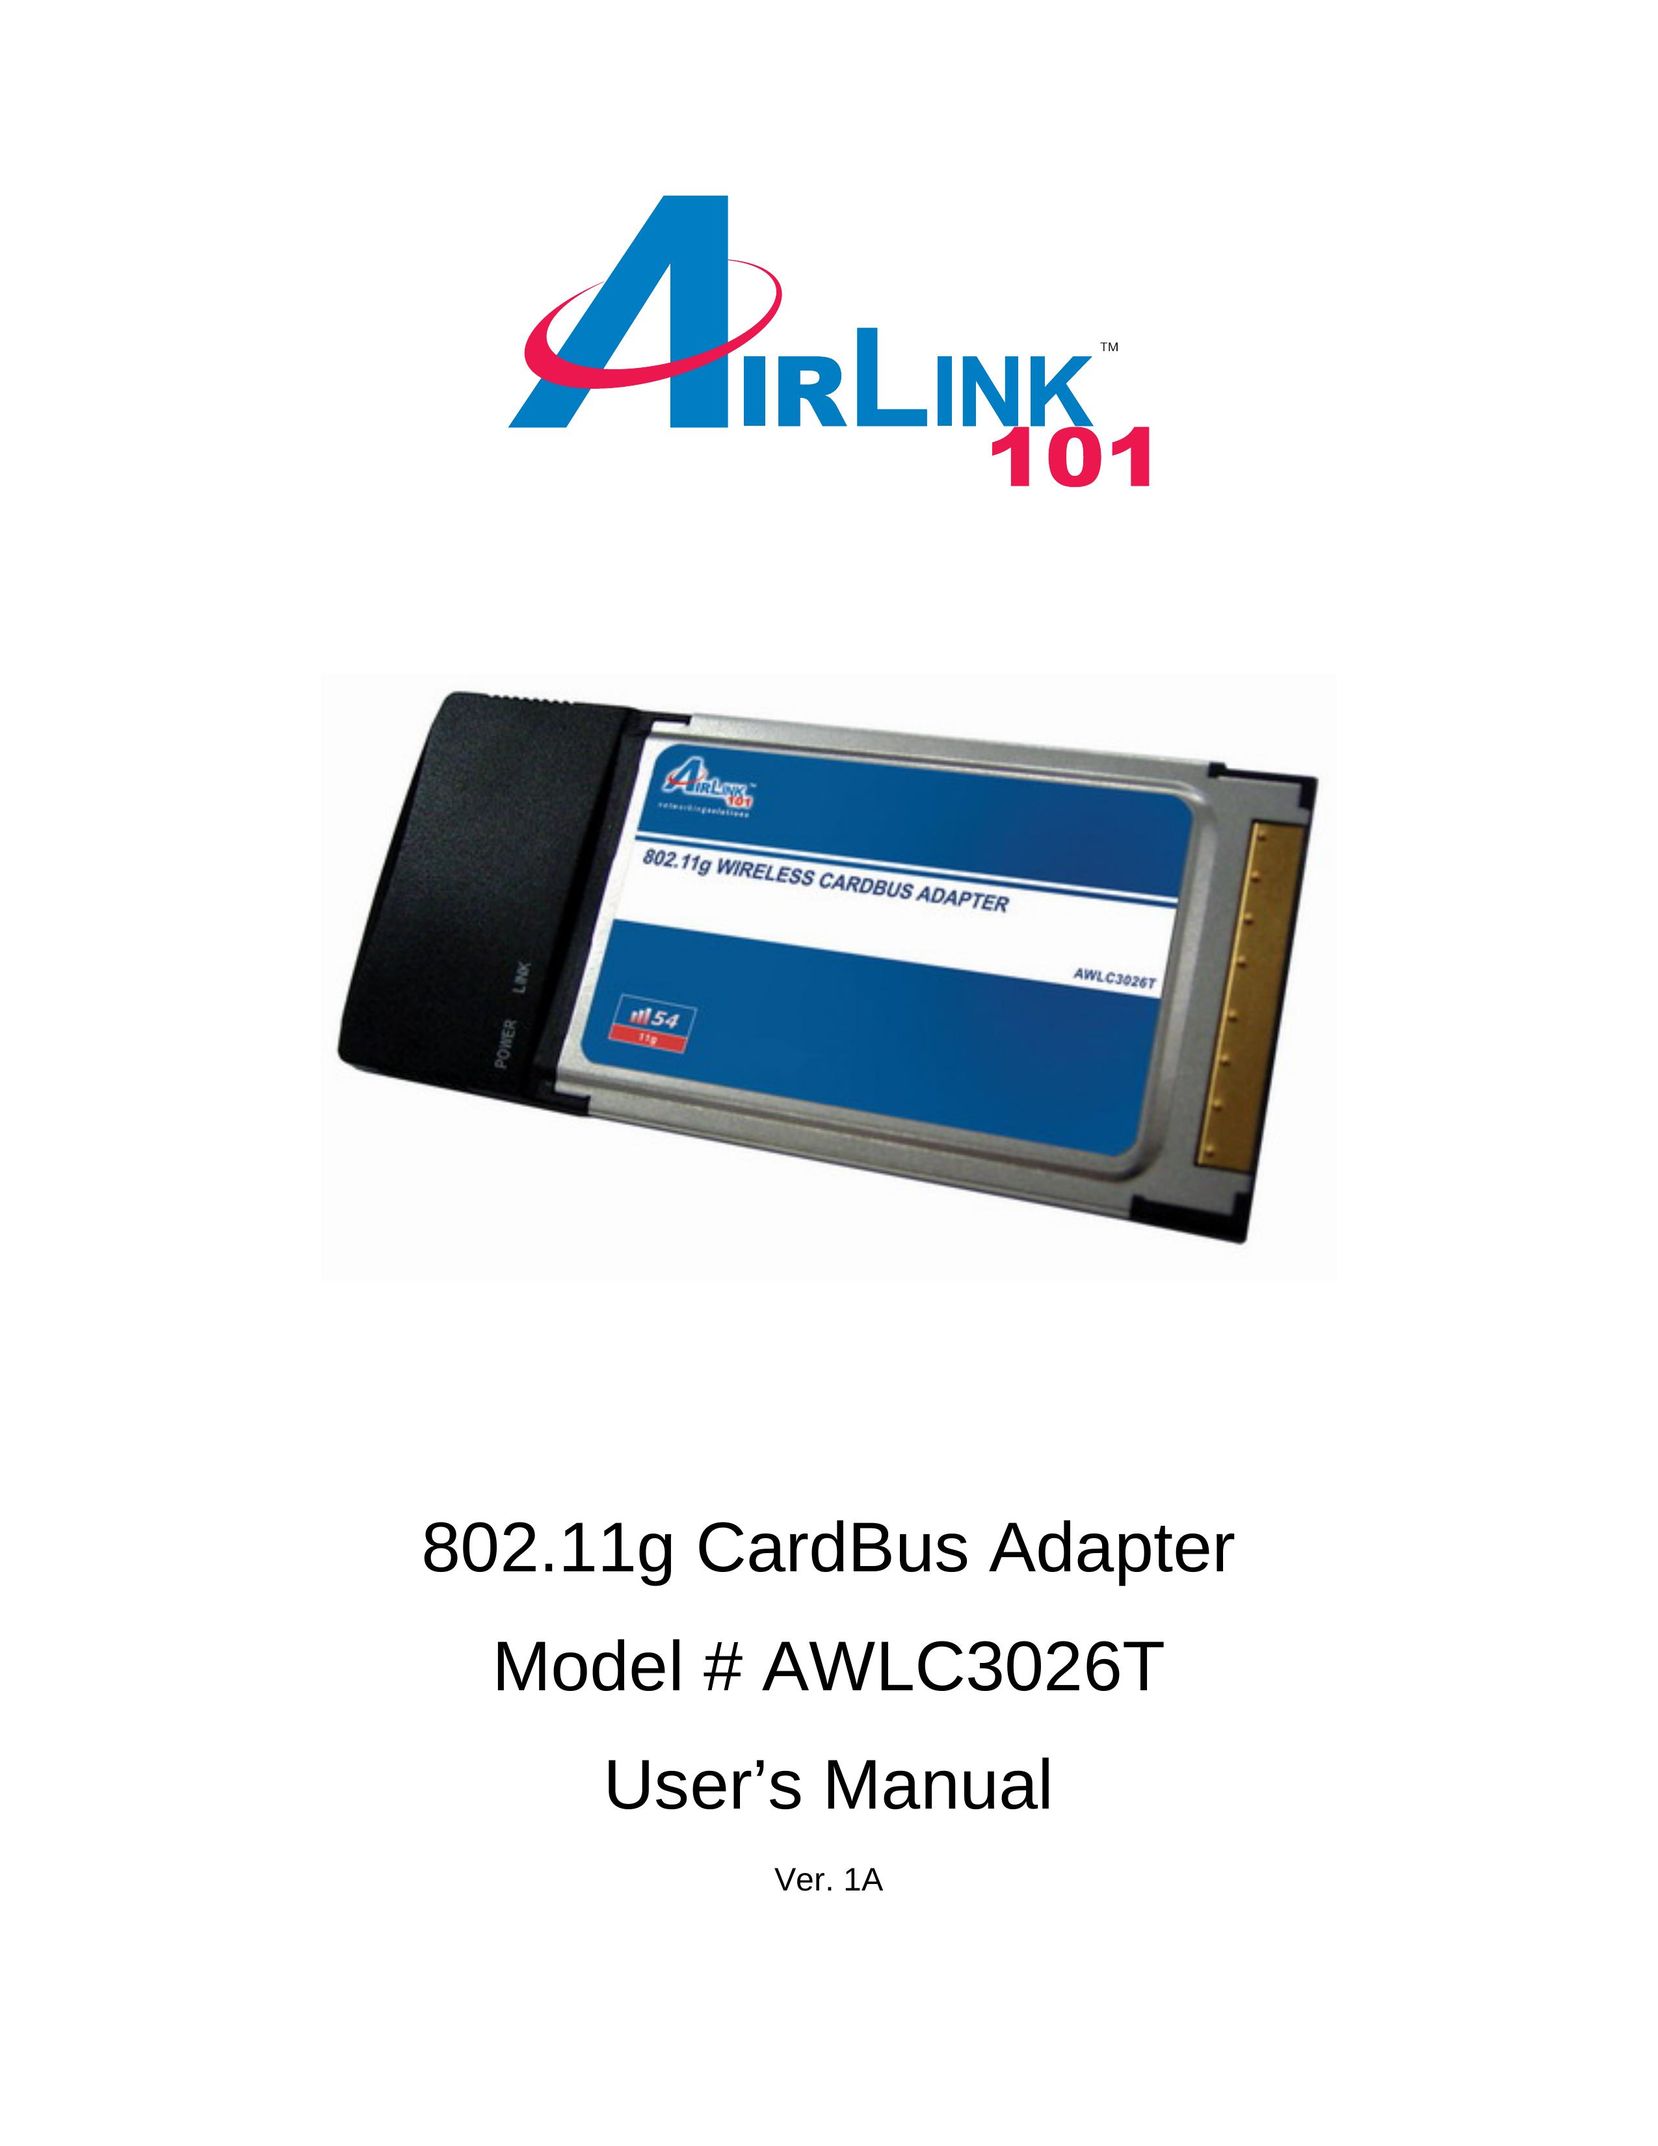 Airlink101 AWLC3026T Network Card User Manual